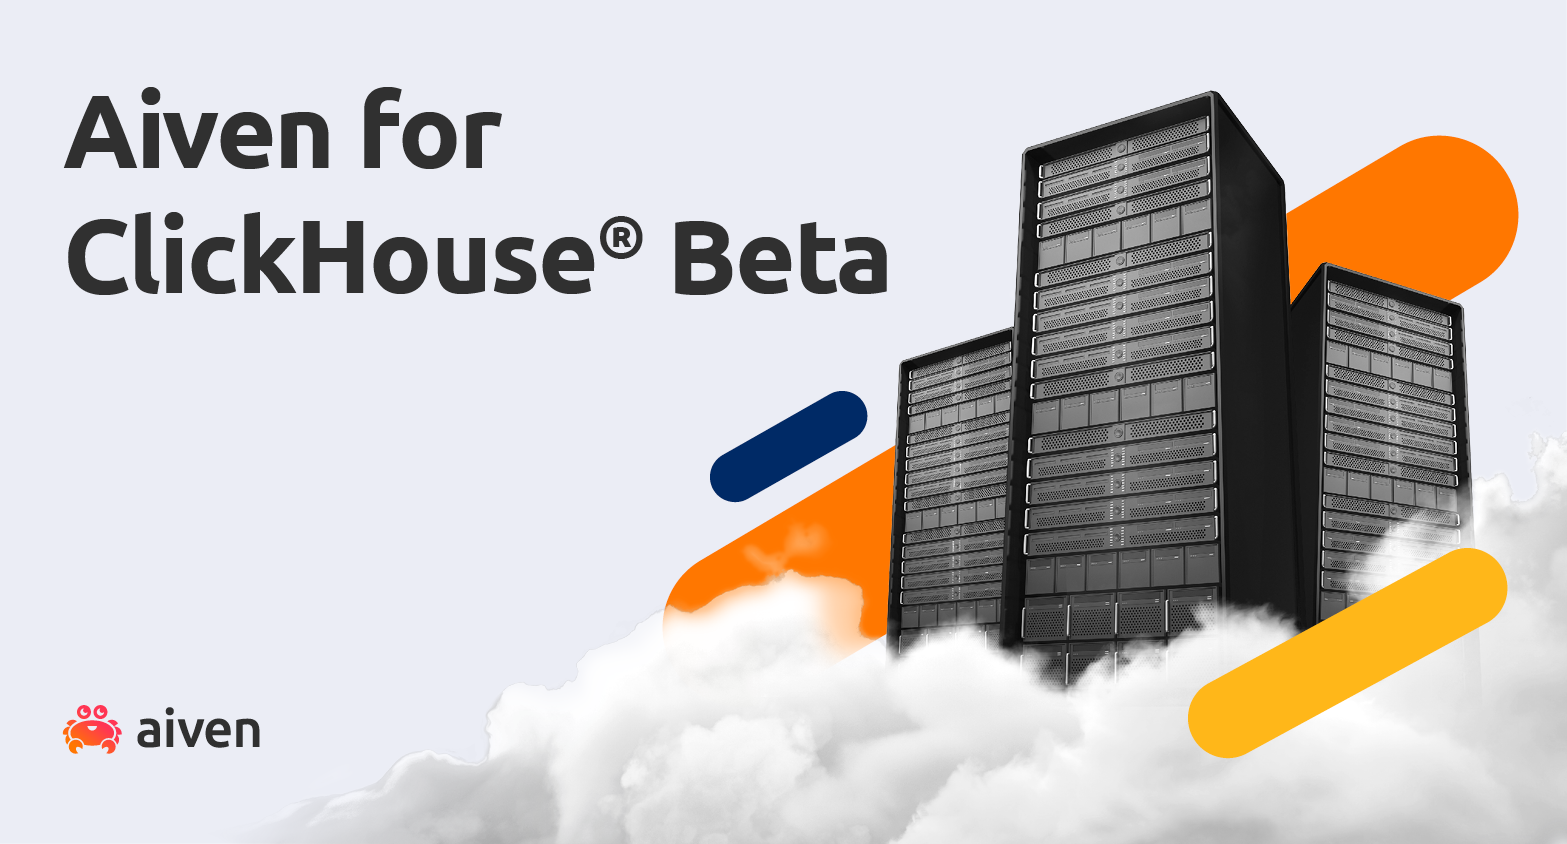 Aiven enters cloud data warehousing marketing with open source ClickHouse® Beta illustration